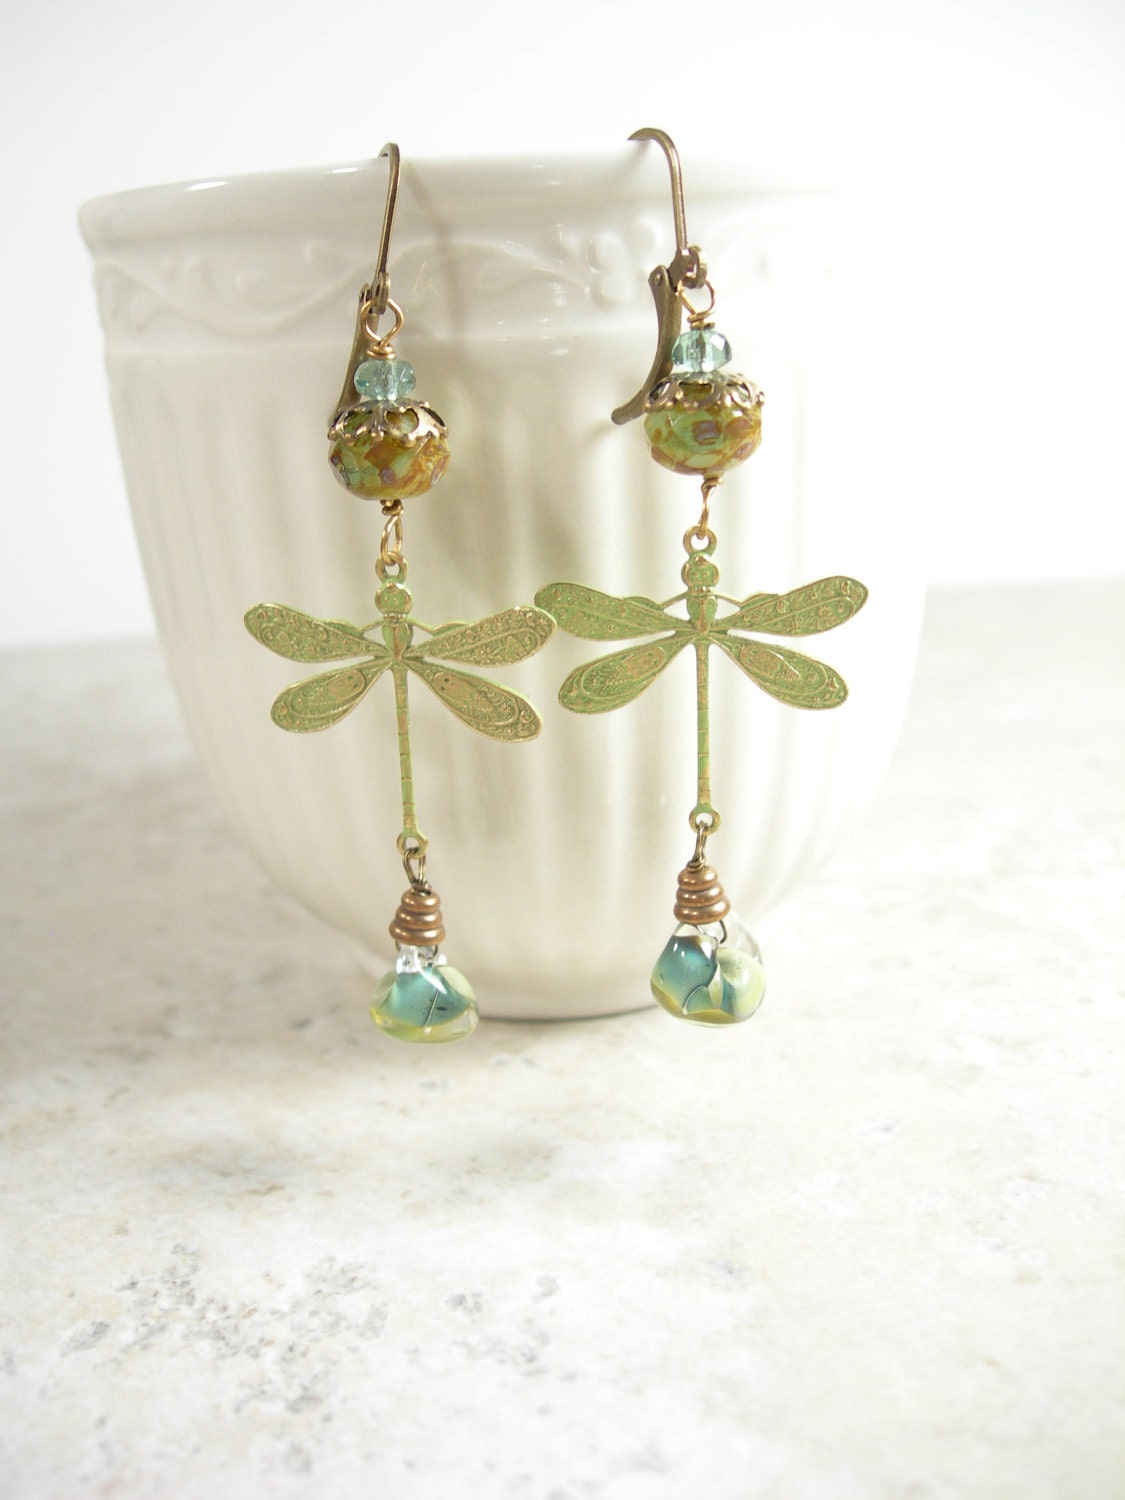 Dragonfly Dream Earrings, patinaed sage gold dragonflies, mossy sage lampwork, and antiqued brass